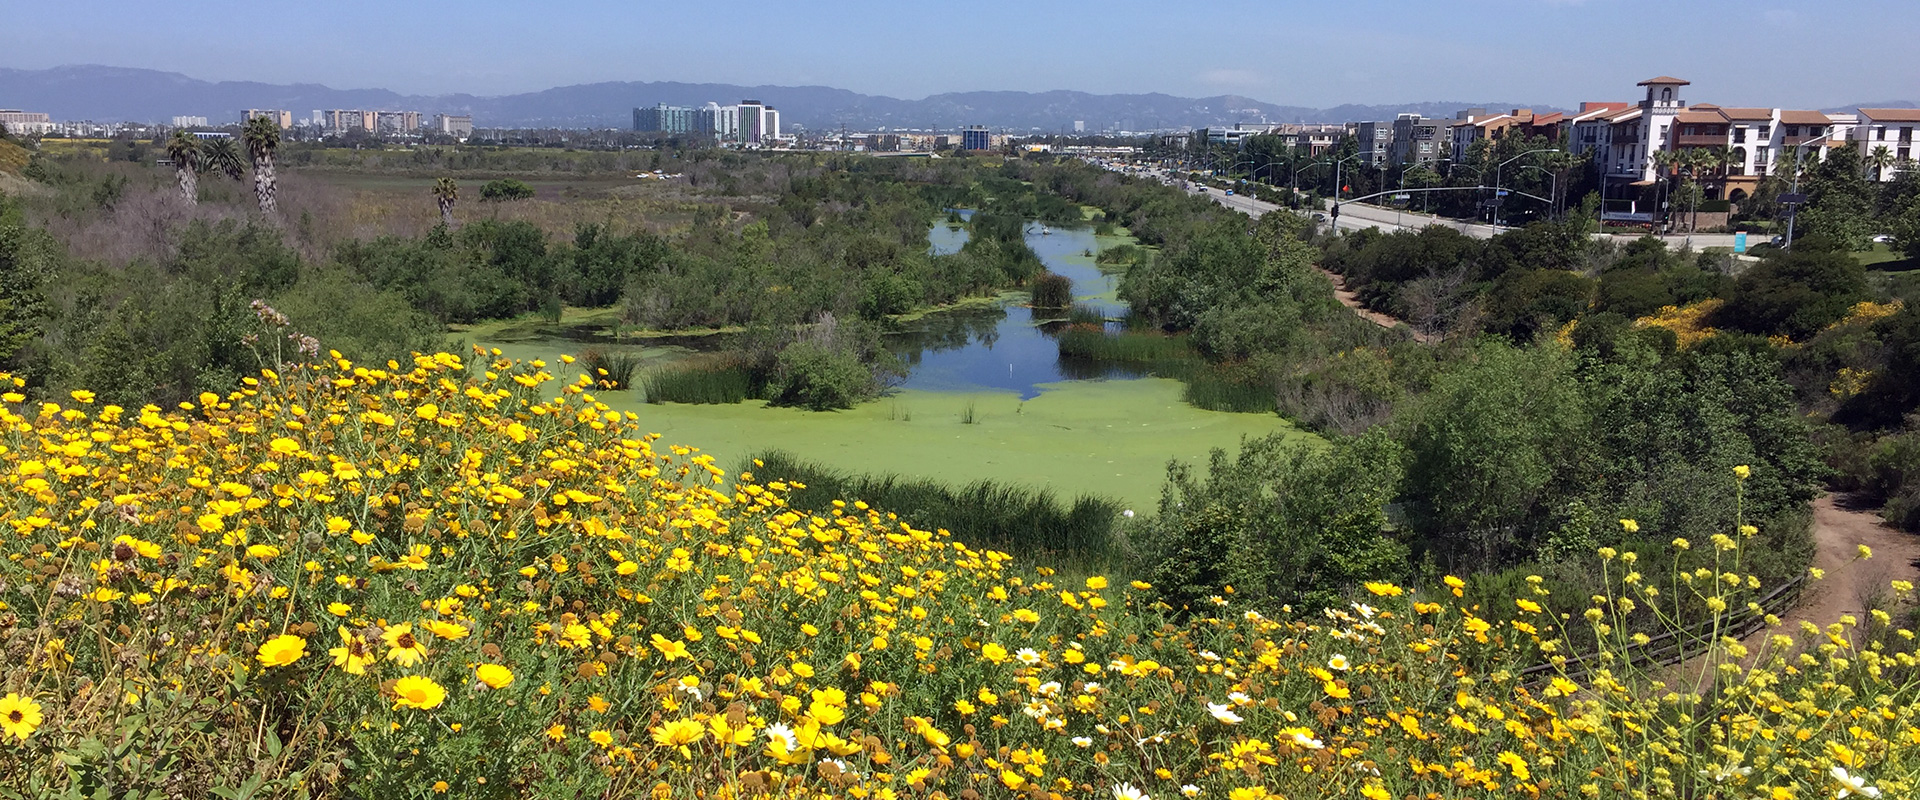 A scenic view of LMU and the neighboring Ballona Creek from a nearby trail with downtown Los Angeles in the distance